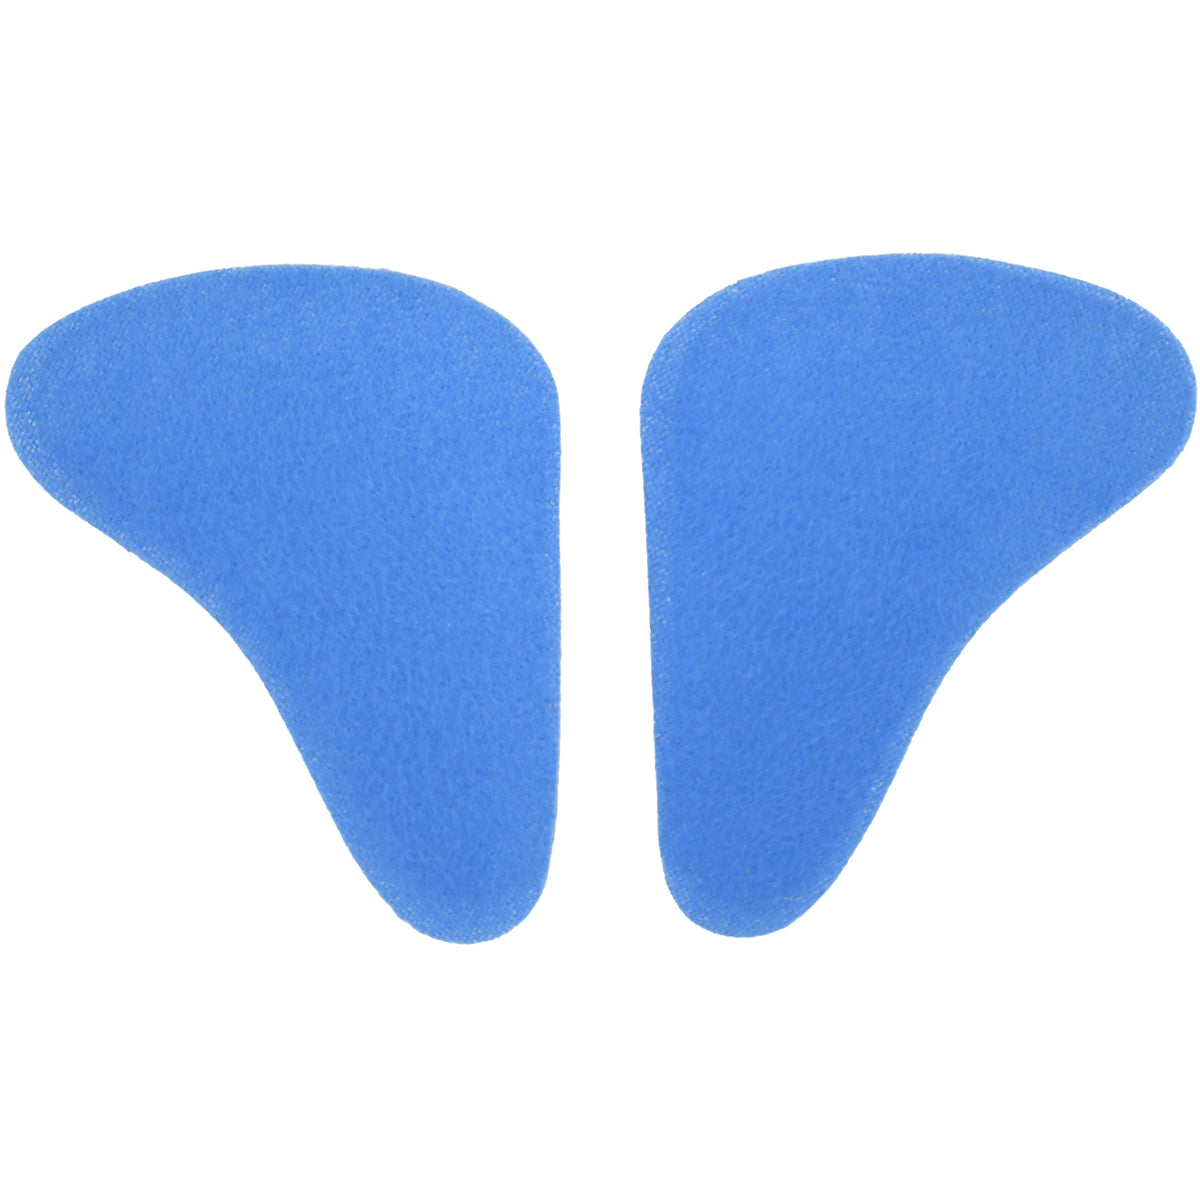 Soft Stride Pain Relief Metatarsal Pads with Top Covers Soft Stride